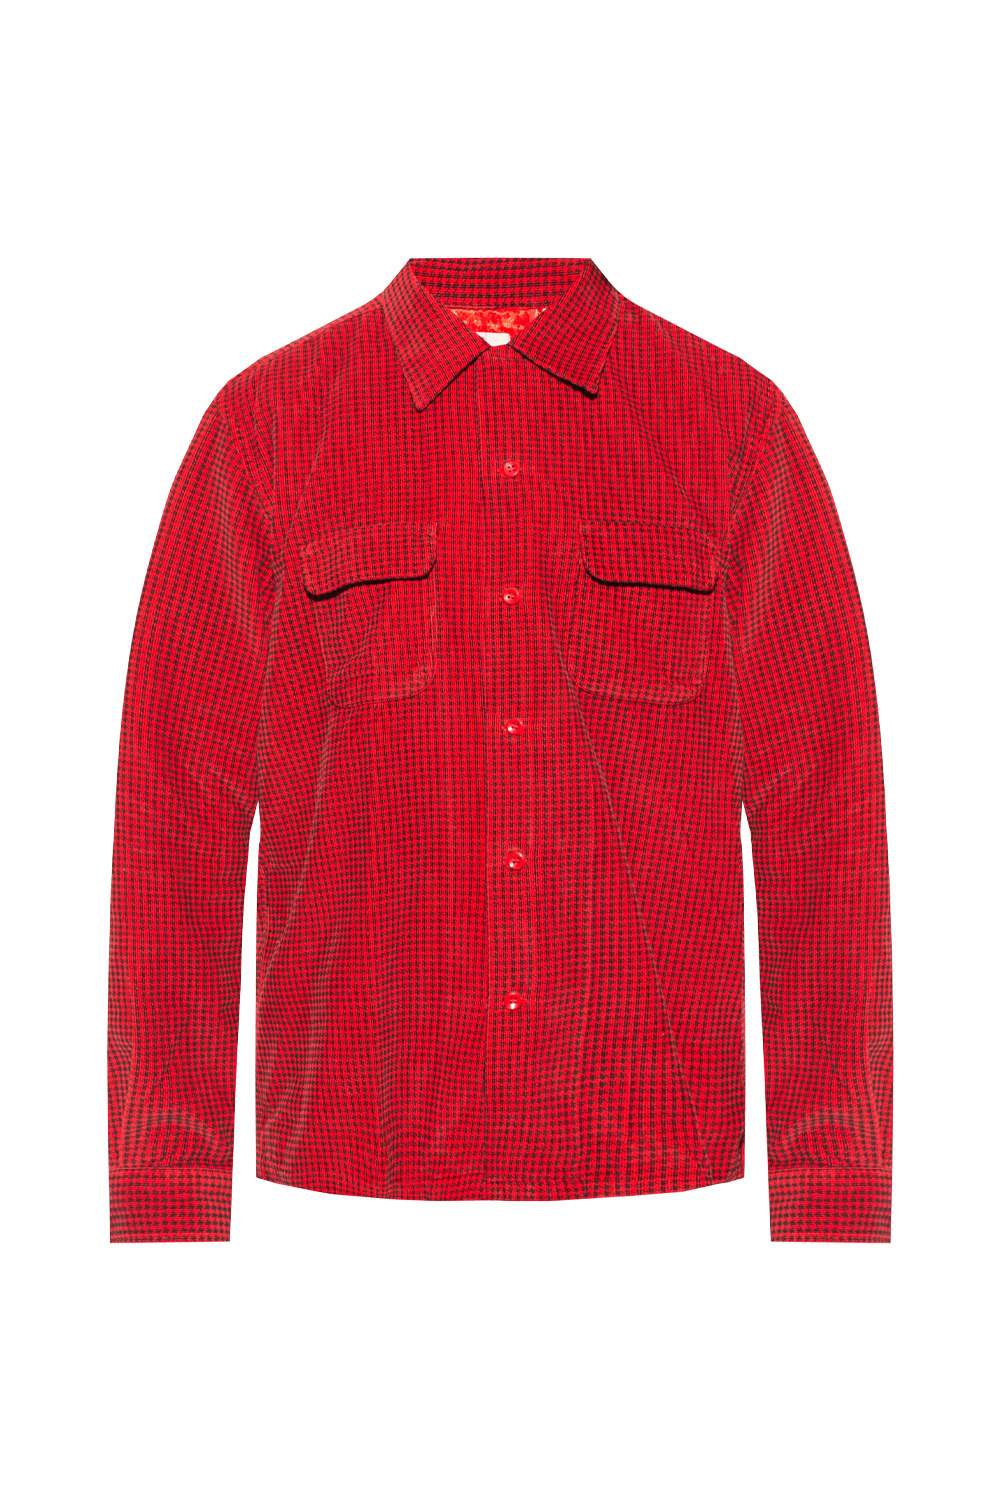 Levi's Shirt ‘Vintage Clothing’ collection